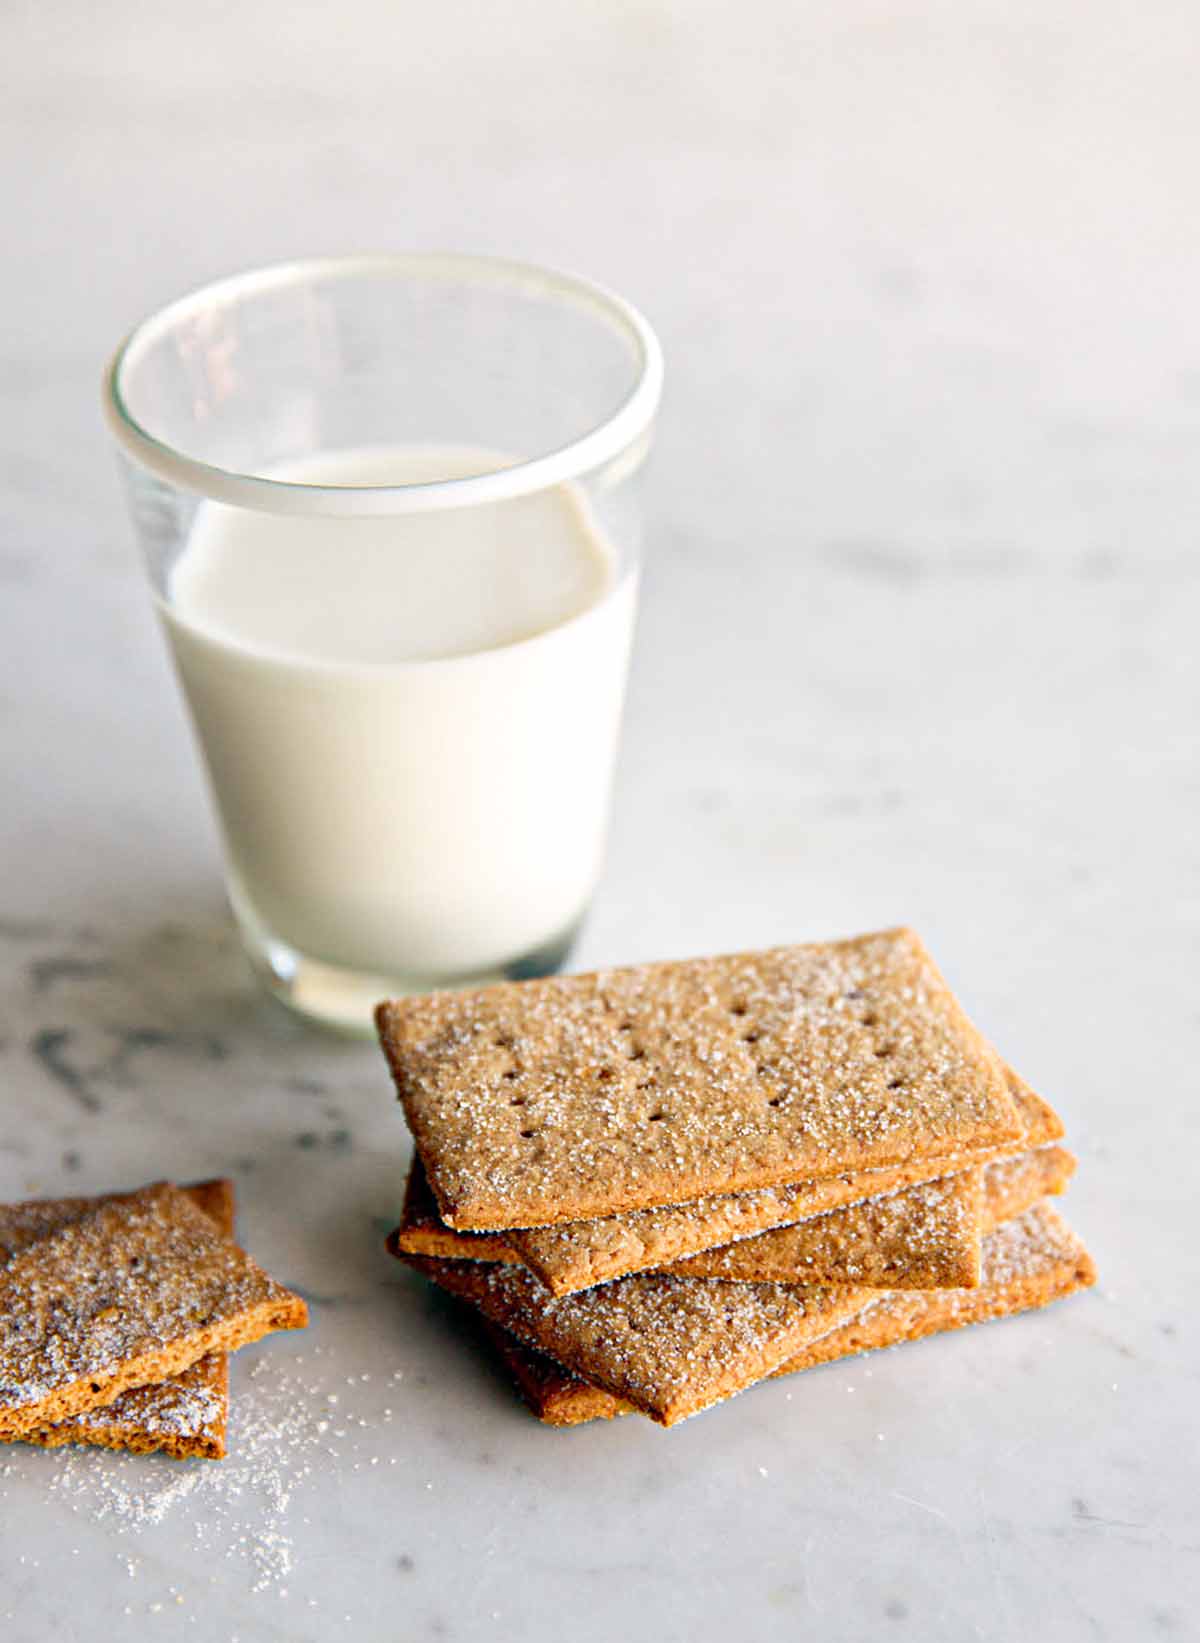 A pile of homemade graham crackers on a marble table with a glass of milk nearby